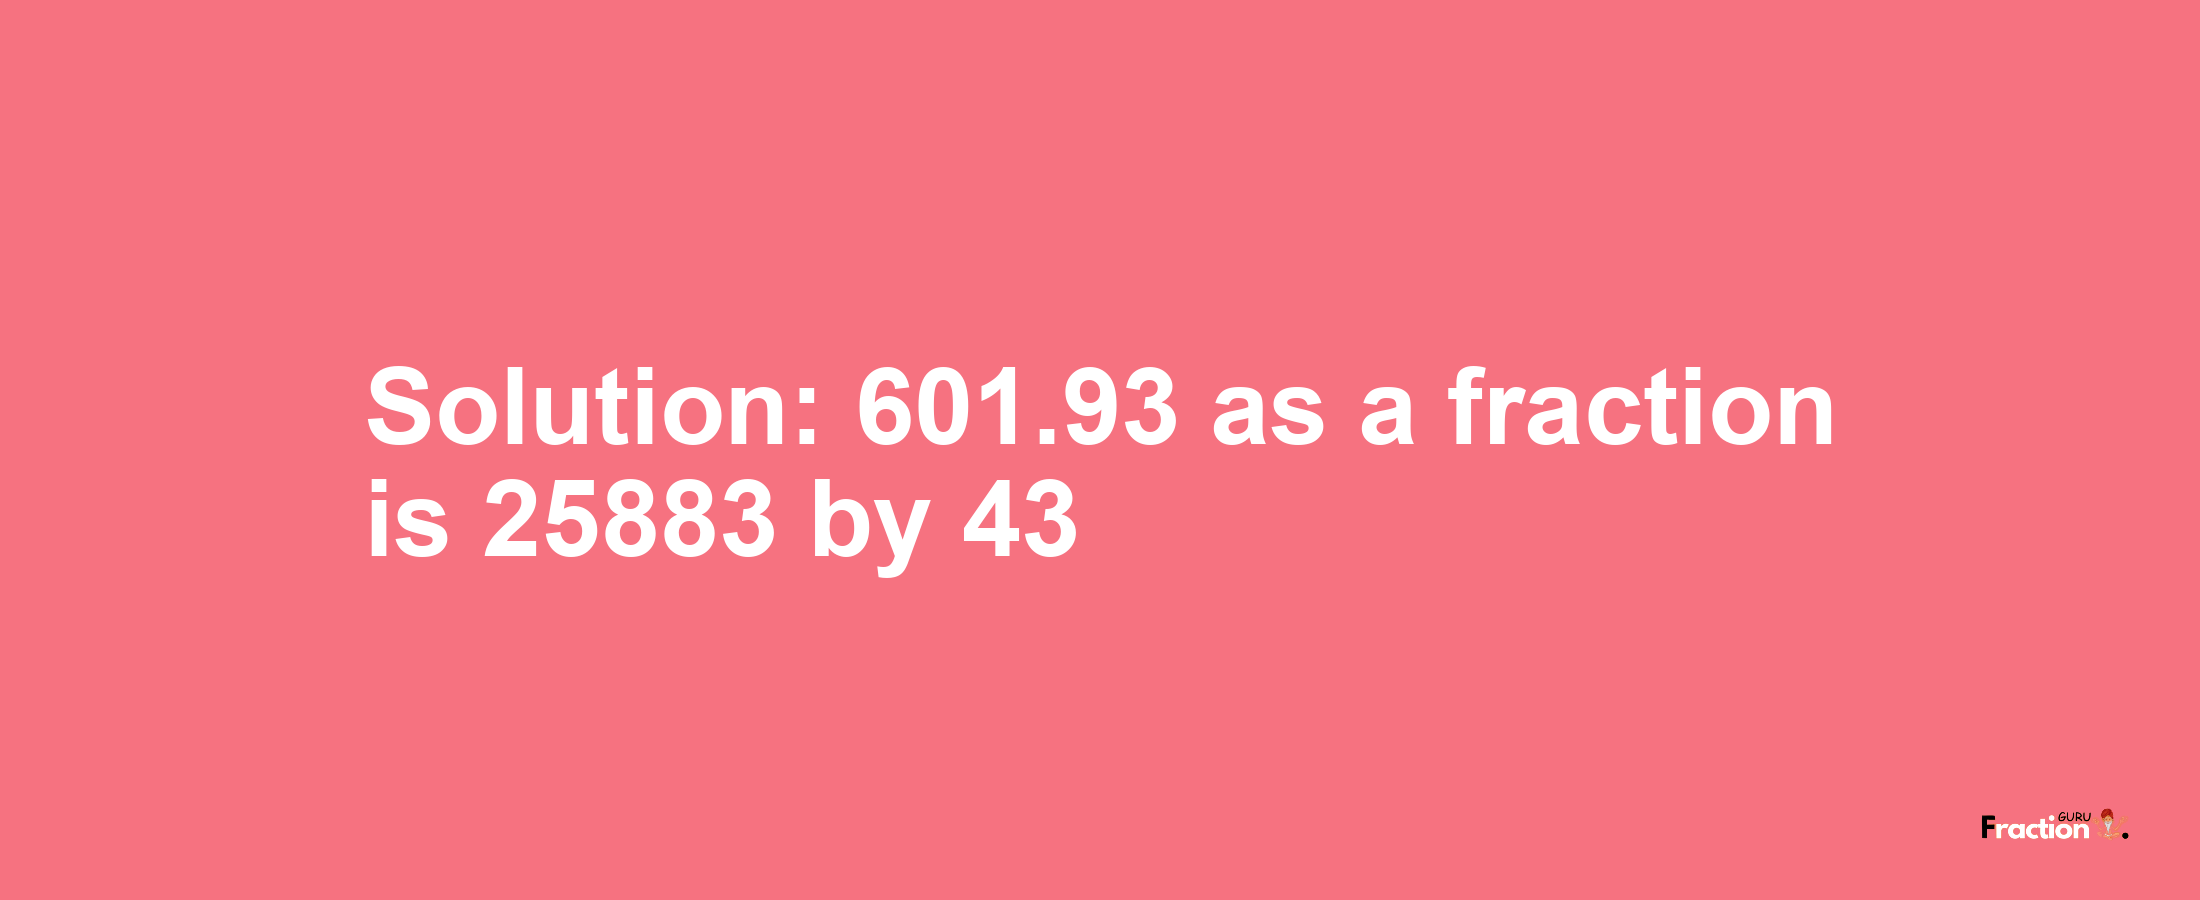 Solution:601.93 as a fraction is 25883/43